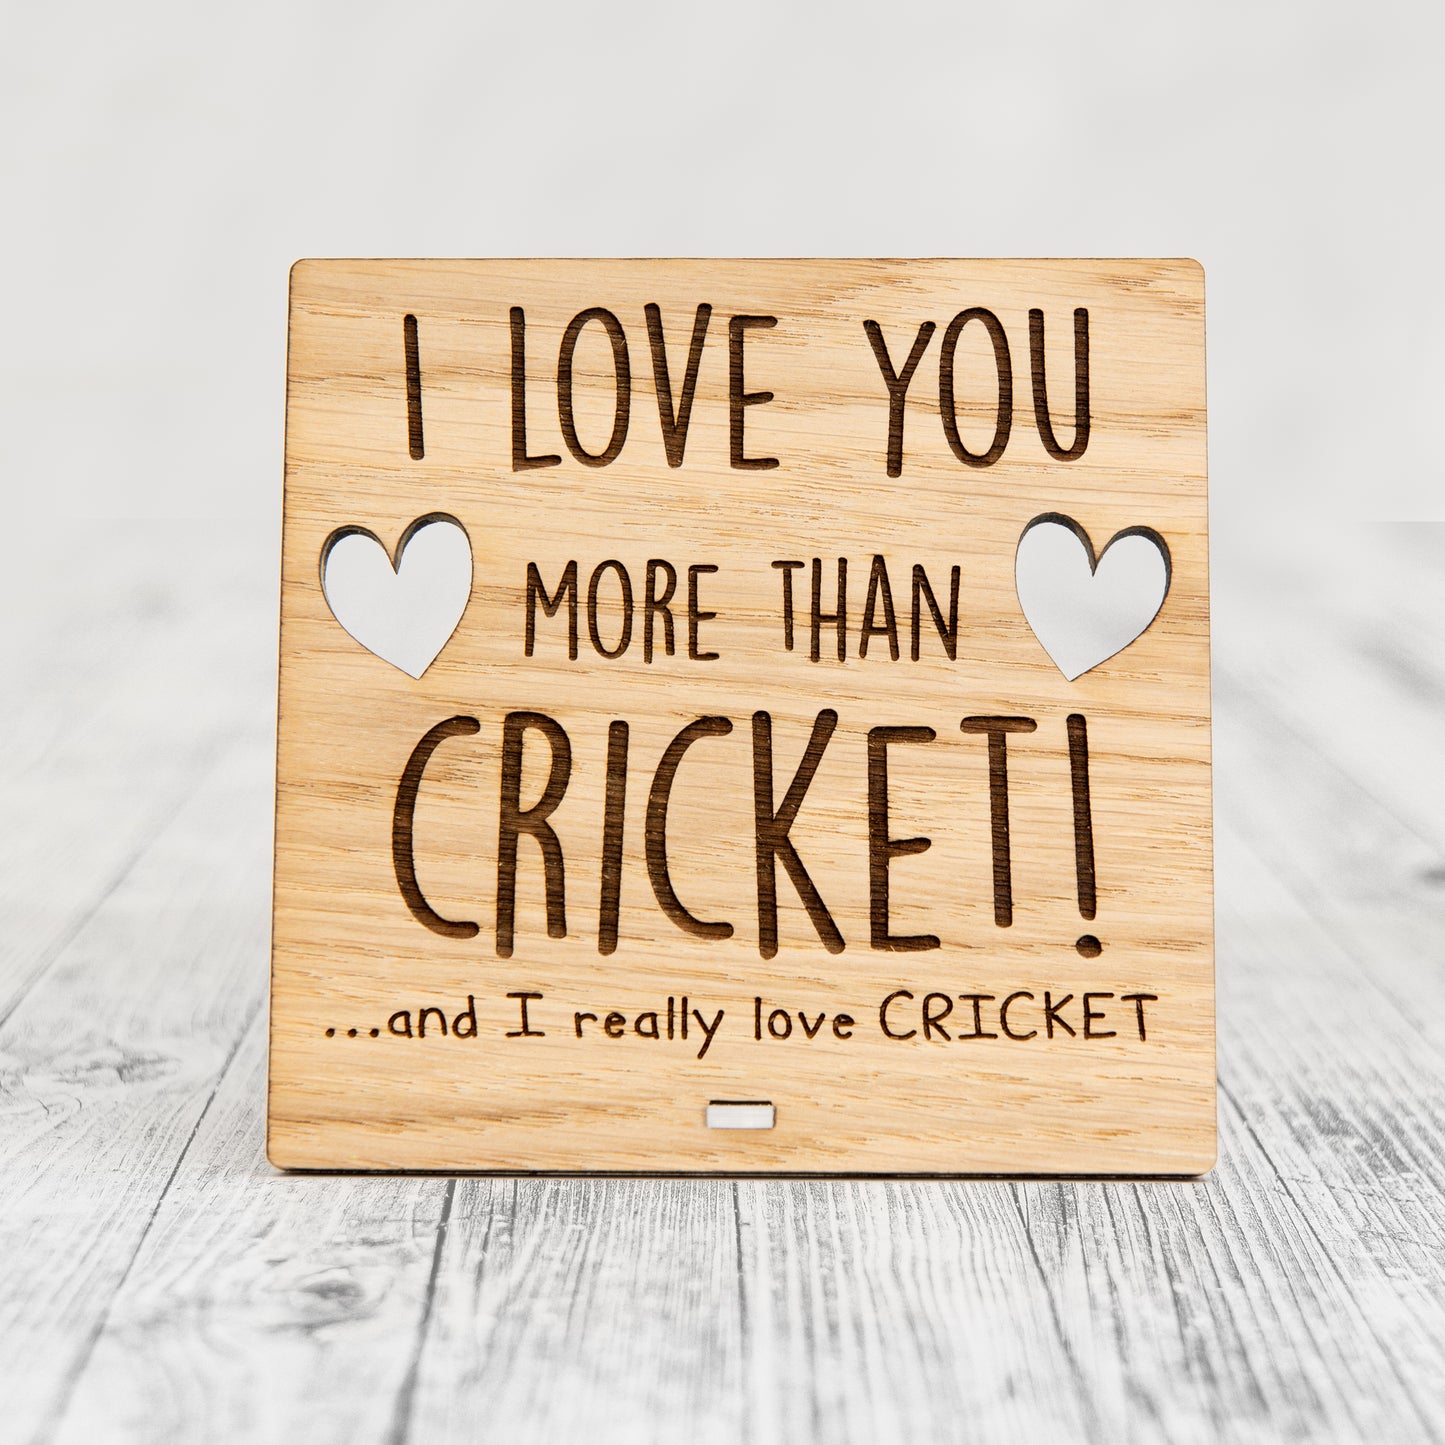 I Love You More Than CRICKET - Wooden Valentine's Day Plaque